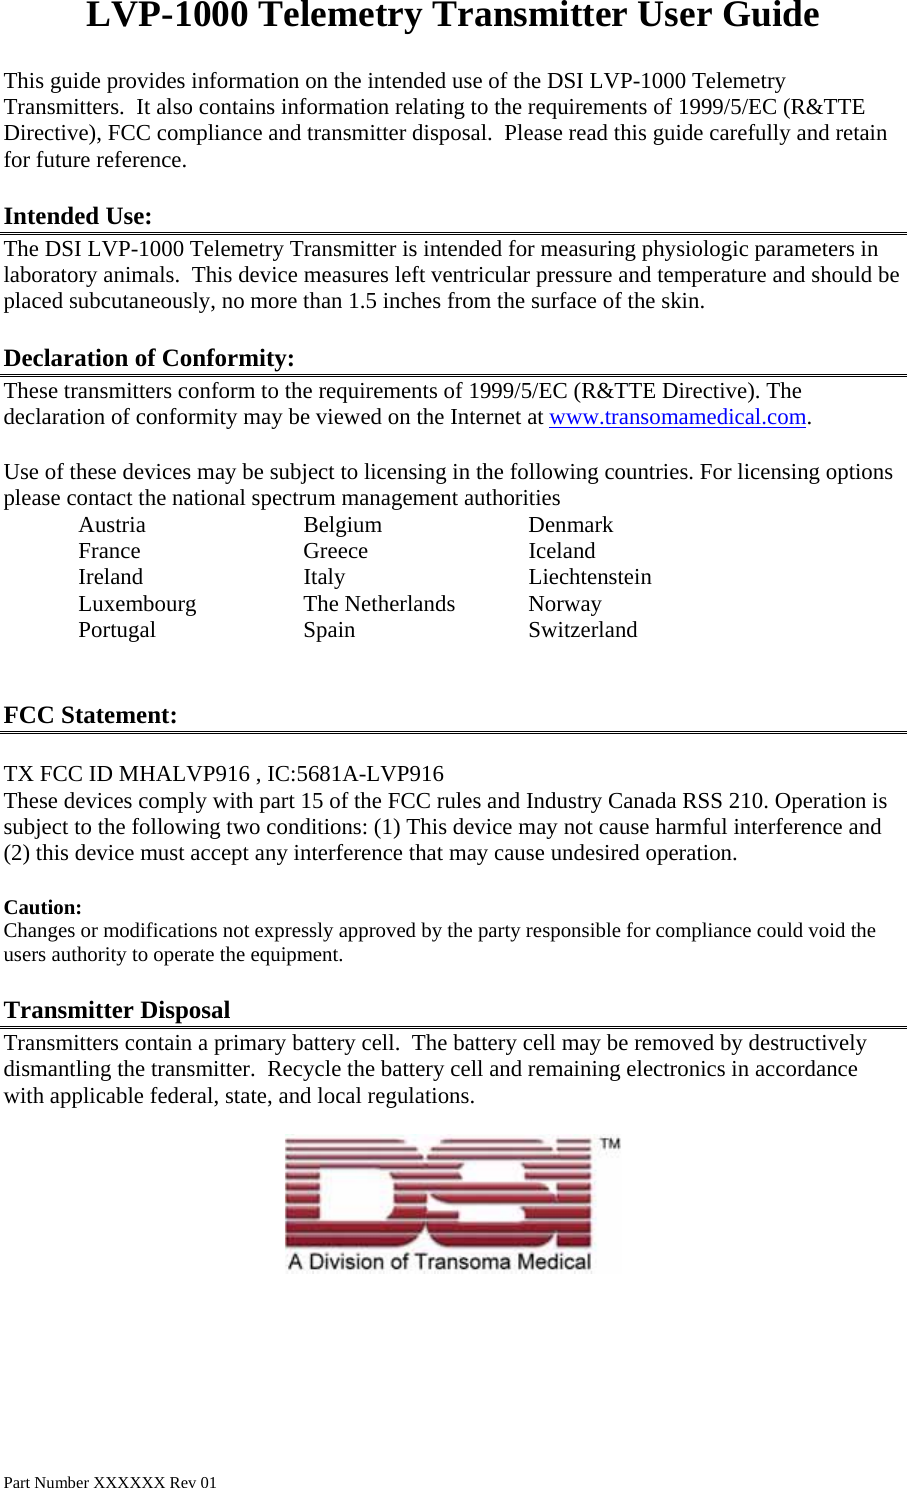 LVP-1000 Telemetry Transmitter User Guide This guide provides information on the intended use of the DSI LVP-1000 Telemetry Transmitters.  It also contains information relating to the requirements of 1999/5/EC (R&amp;TTE Directive), FCC compliance and transmitter disposal.  Please read this guide carefully and retain for future reference.  Intended Use: The DSI LVP-1000 Telemetry Transmitter is intended for measuring physiologic parameters in laboratory animals.  This device measures left ventricular pressure and temperature and should be placed subcutaneously, no more than 1.5 inches from the surface of the skin.   Declaration of Conformity: These transmitters conform to the requirements of 1999/5/EC (R&amp;TTE Directive). The declaration of conformity may be viewed on the Internet at www.transomamedical.com.  Use of these devices may be subject to licensing in the following countries. For licensing options please contact the national spectrum management authorities  Austria   Belgium  Denmark France   Greece   Iceland Ireland   Italy   Liechtenstein Luxembourg   The Netherlands  Norway Portugal  Spain   Switzerland   FCC Statement:  TX FCC ID MHALVP916 , IC:5681A-LVP916 These devices comply with part 15 of the FCC rules and Industry Canada RSS 210. Operation is subject to the following two conditions: (1) This device may not cause harmful interference and (2) this device must accept any interference that may cause undesired operation.  Caution: Changes or modifications not expressly approved by the party responsible for compliance could void the users authority to operate the equipment.  Transmitter Disposal Transmitters contain a primary battery cell.  The battery cell may be removed by destructively dismantling the transmitter.  Recycle the battery cell and remaining electronics in accordance with applicable federal, state, and local regulations.     Part Number XXXXXX Rev 01 